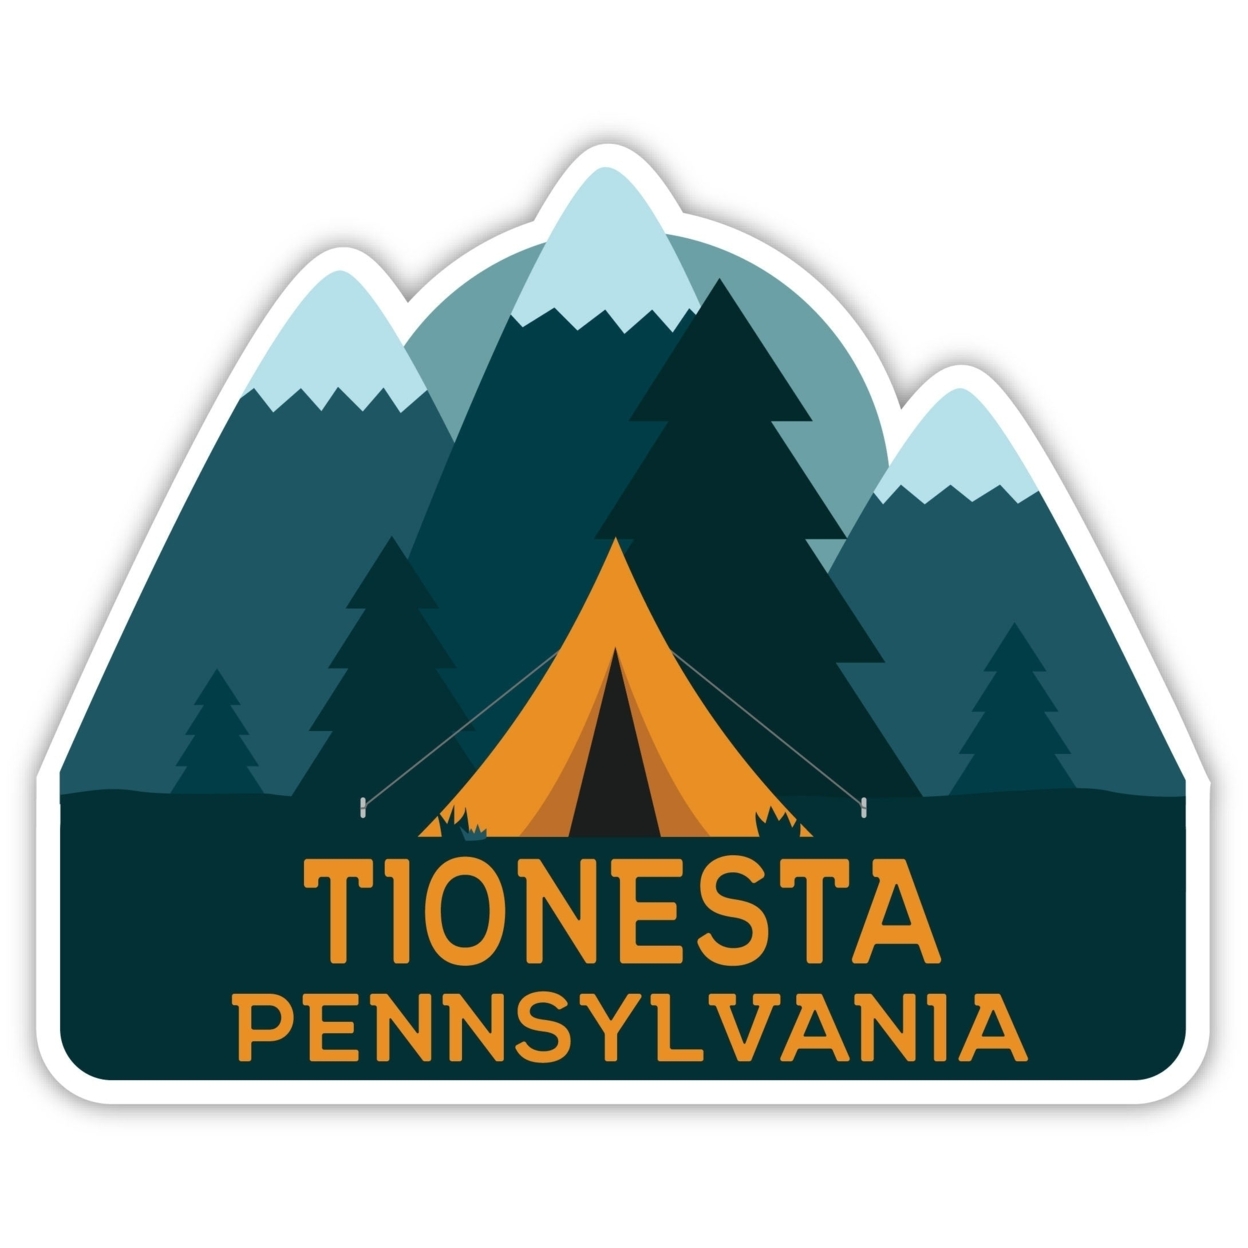 Tionesta Pennsylvania Souvenir Decorative Stickers (Choose Theme And Size) - Single Unit, 4-Inch, Great Outdoors